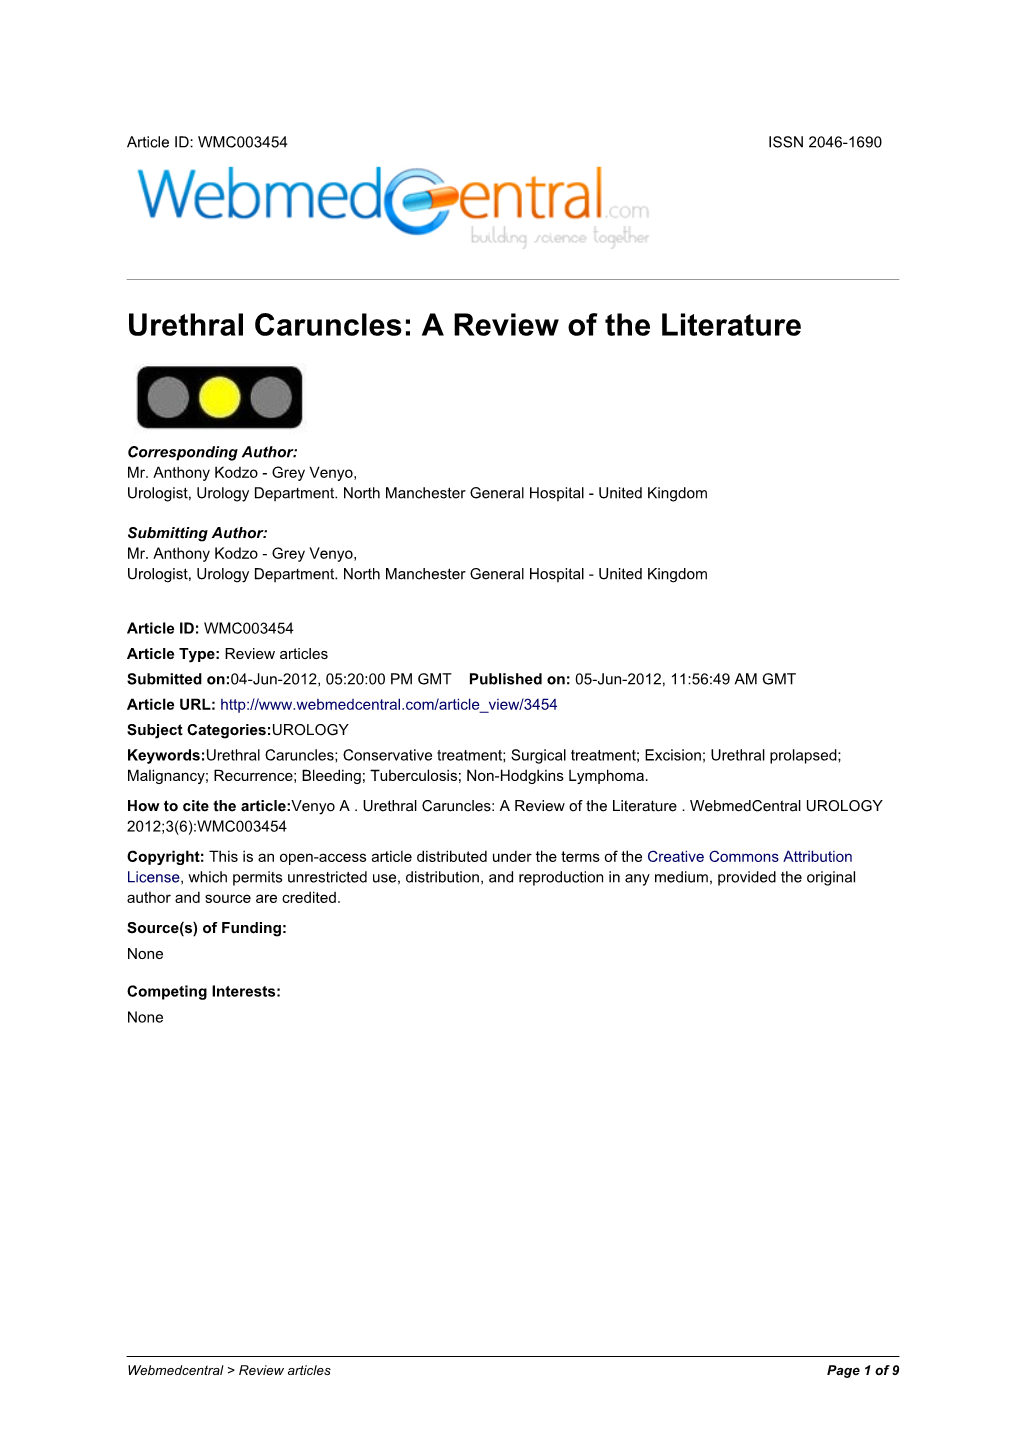 Urethral Caruncles: a Review of the Literature